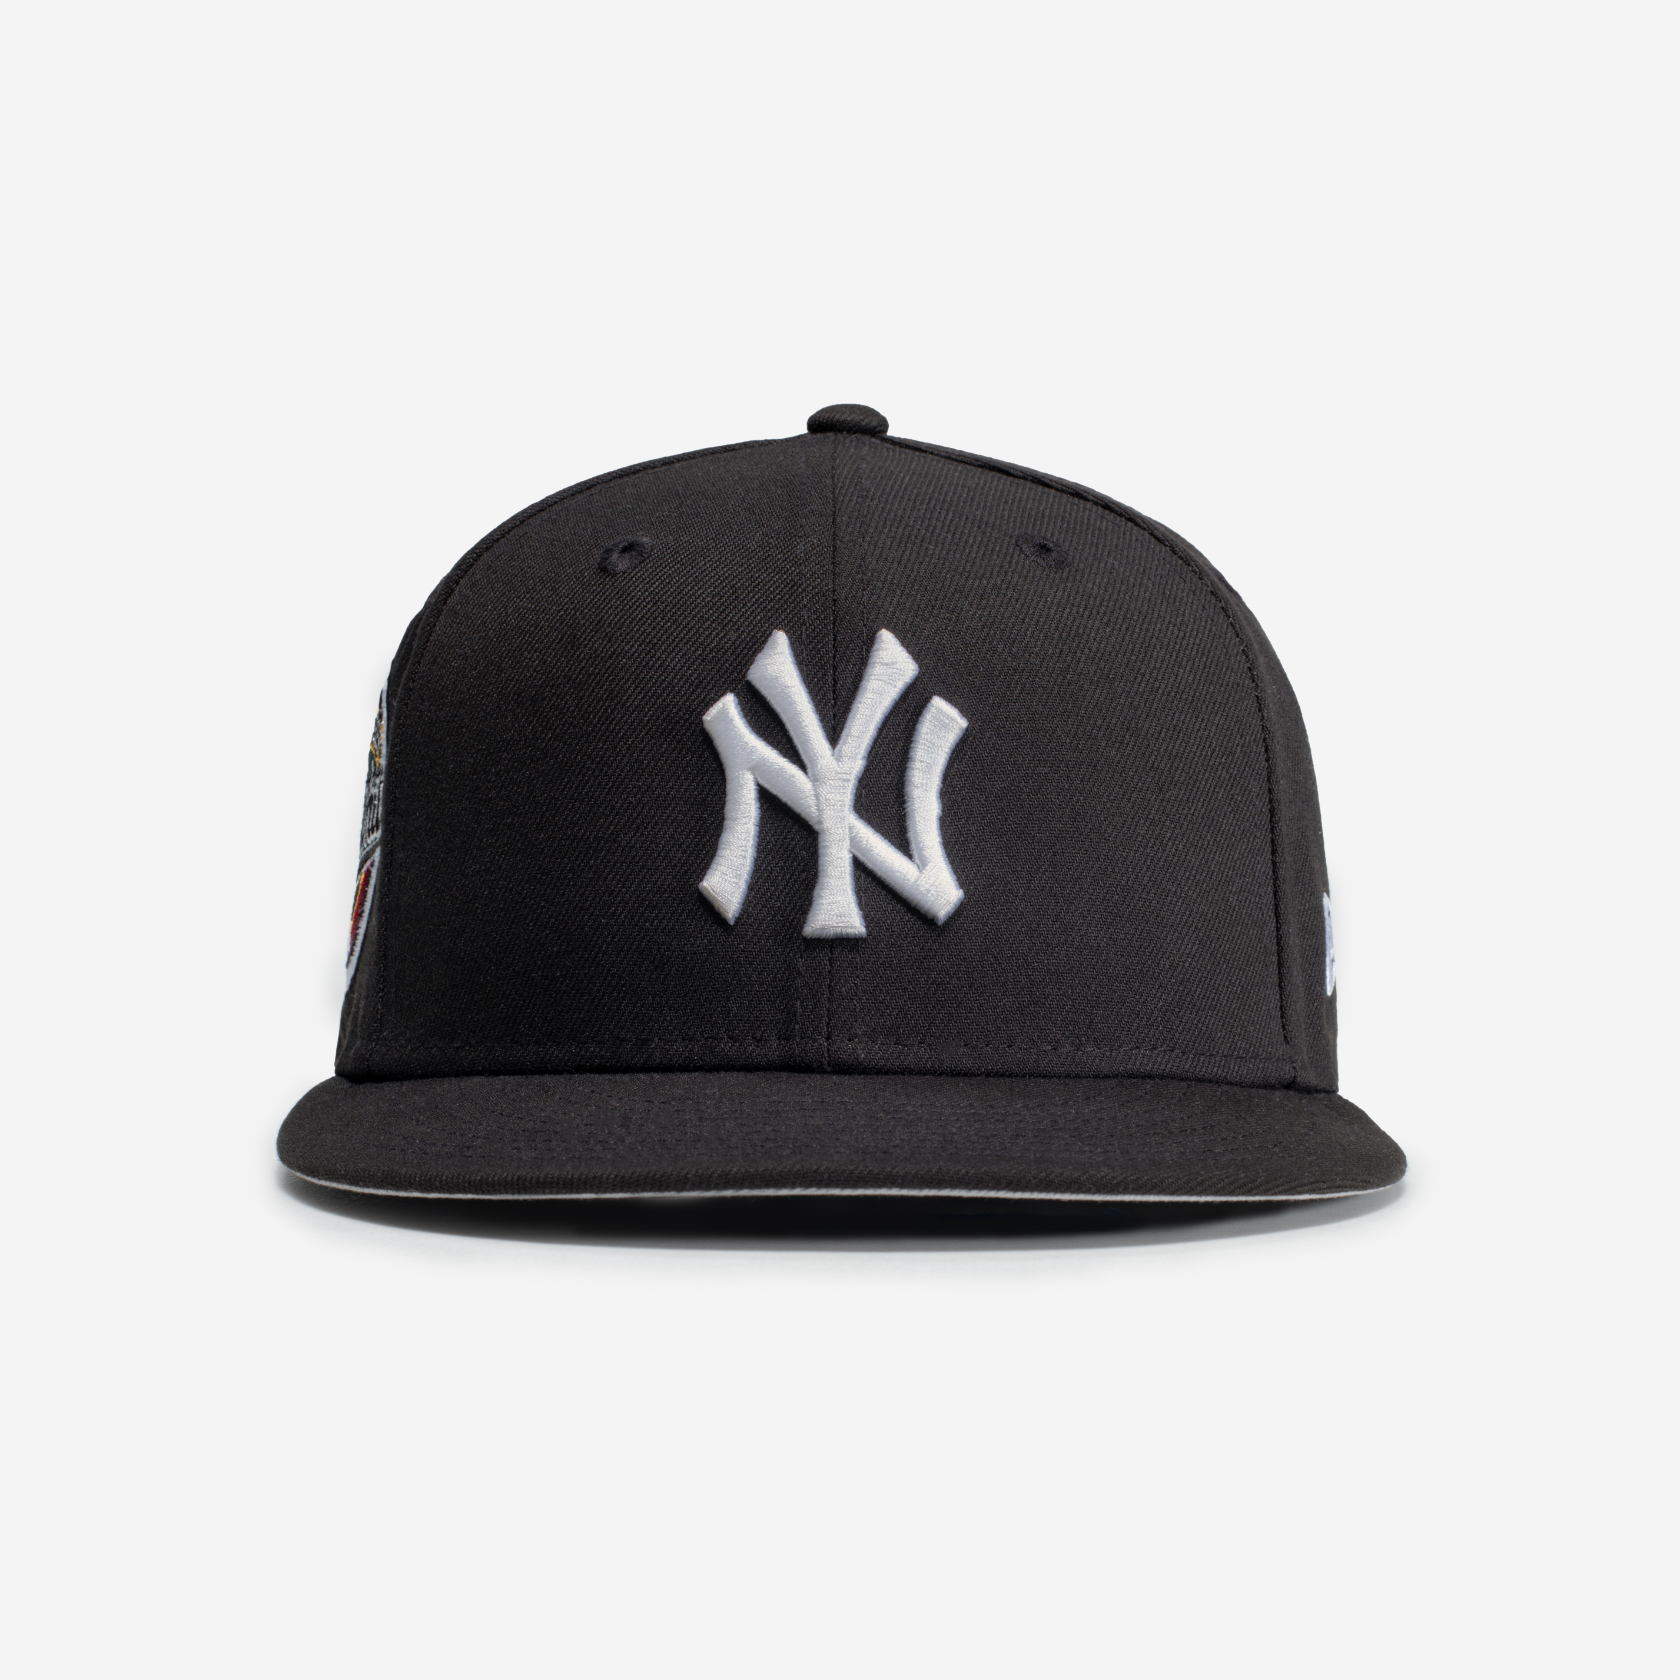 Frank White All Star Fitted Hat - Black 7-3/8